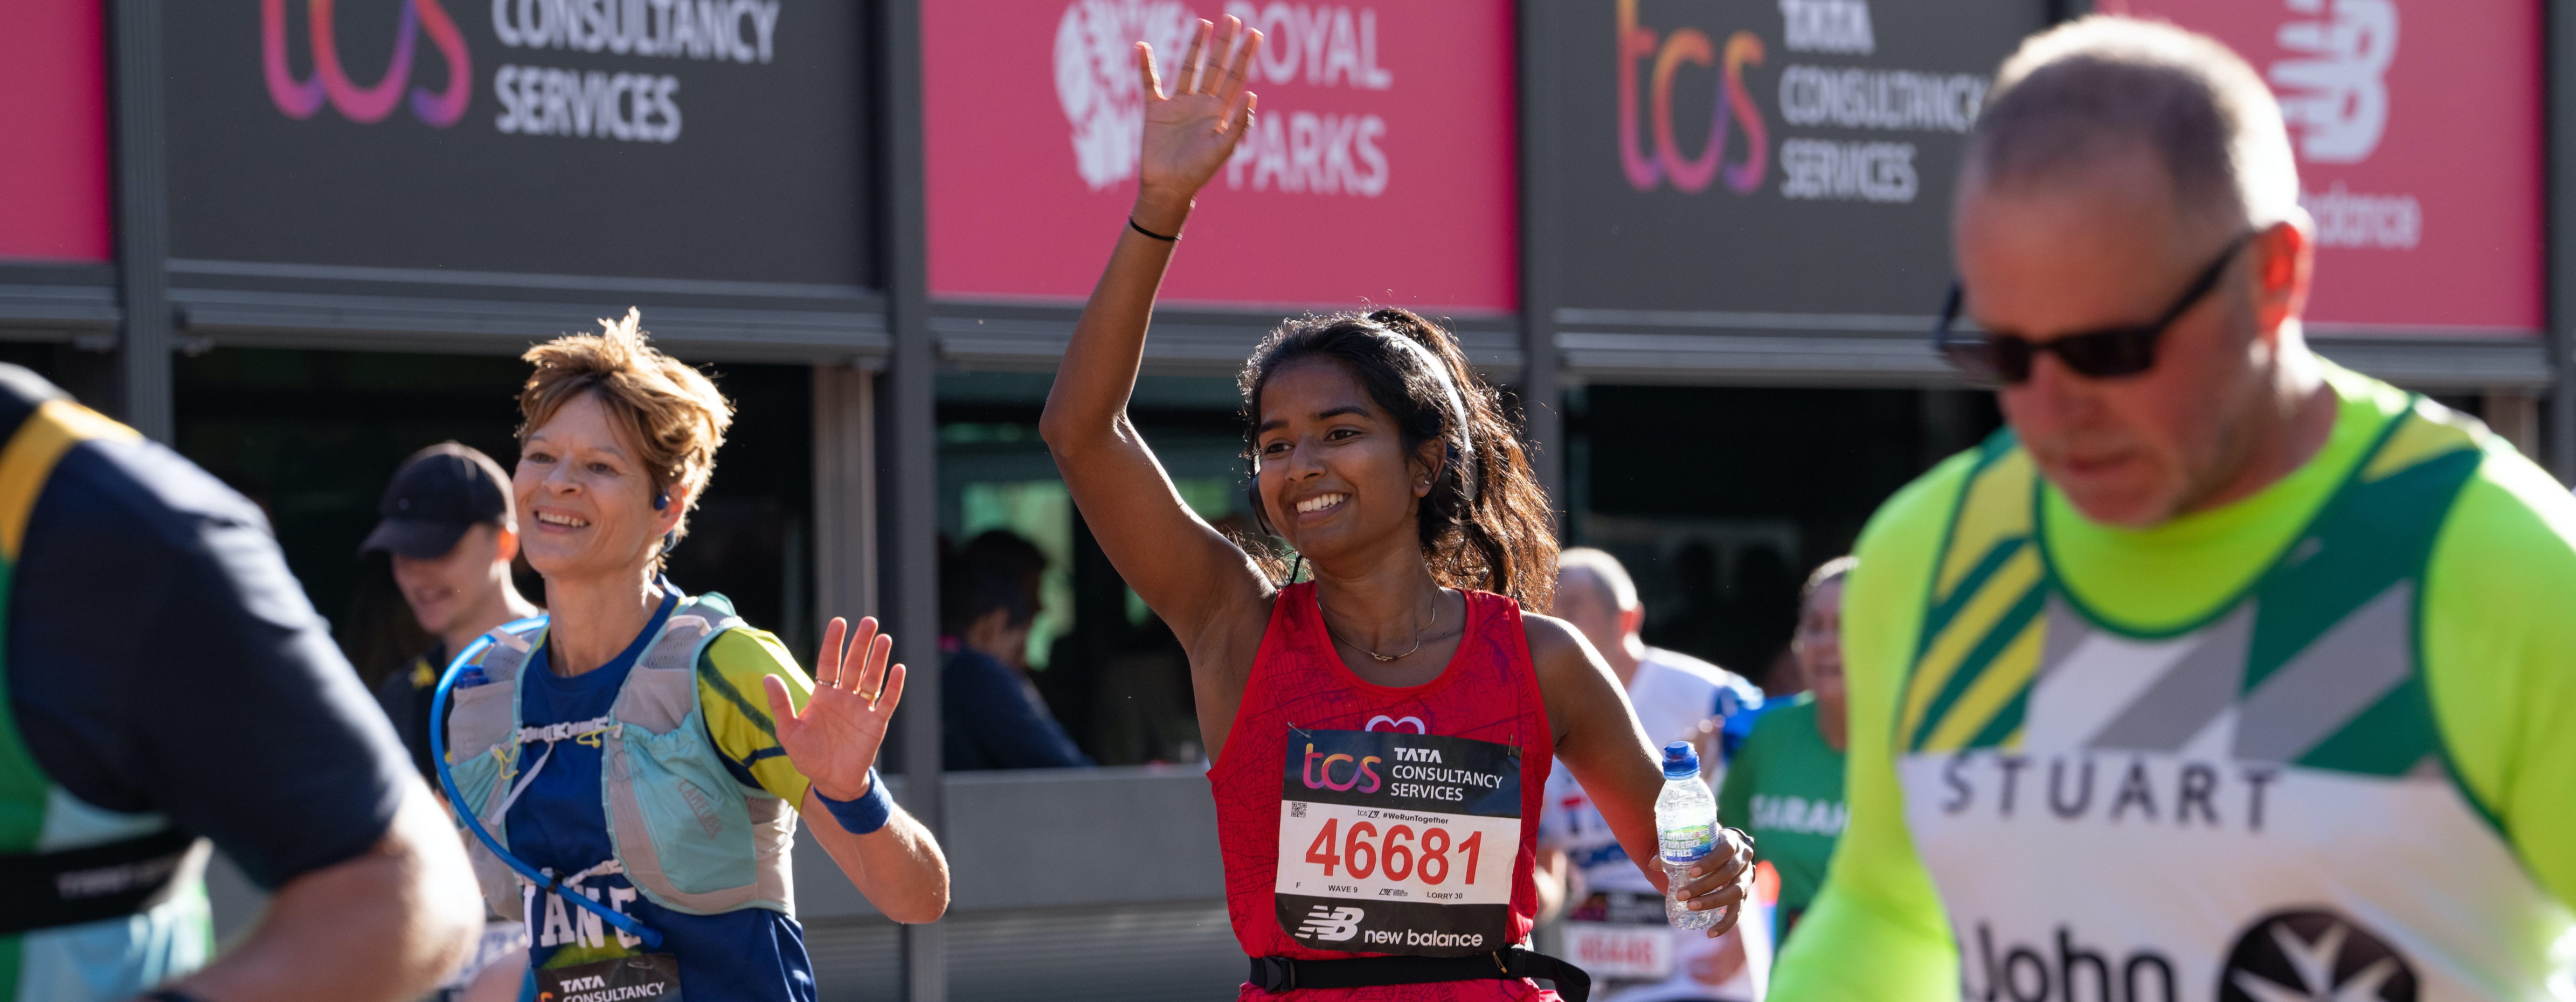 Participants wave as they move down The Mall at the TCS London Marathon